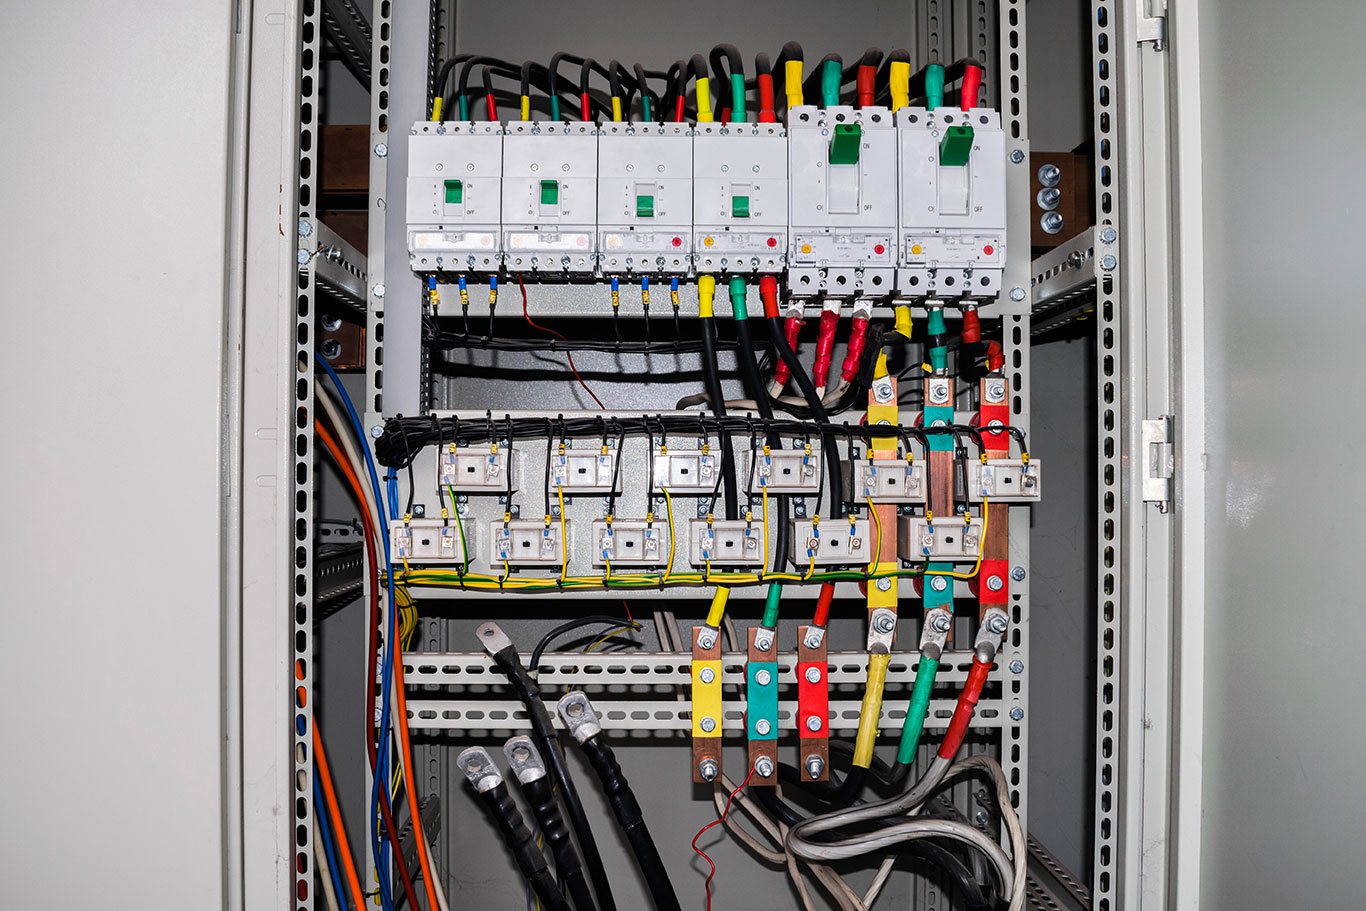 https://www.rgelectric.net/wp-content/uploads/2021/10/Electrical-Boxes.jpg